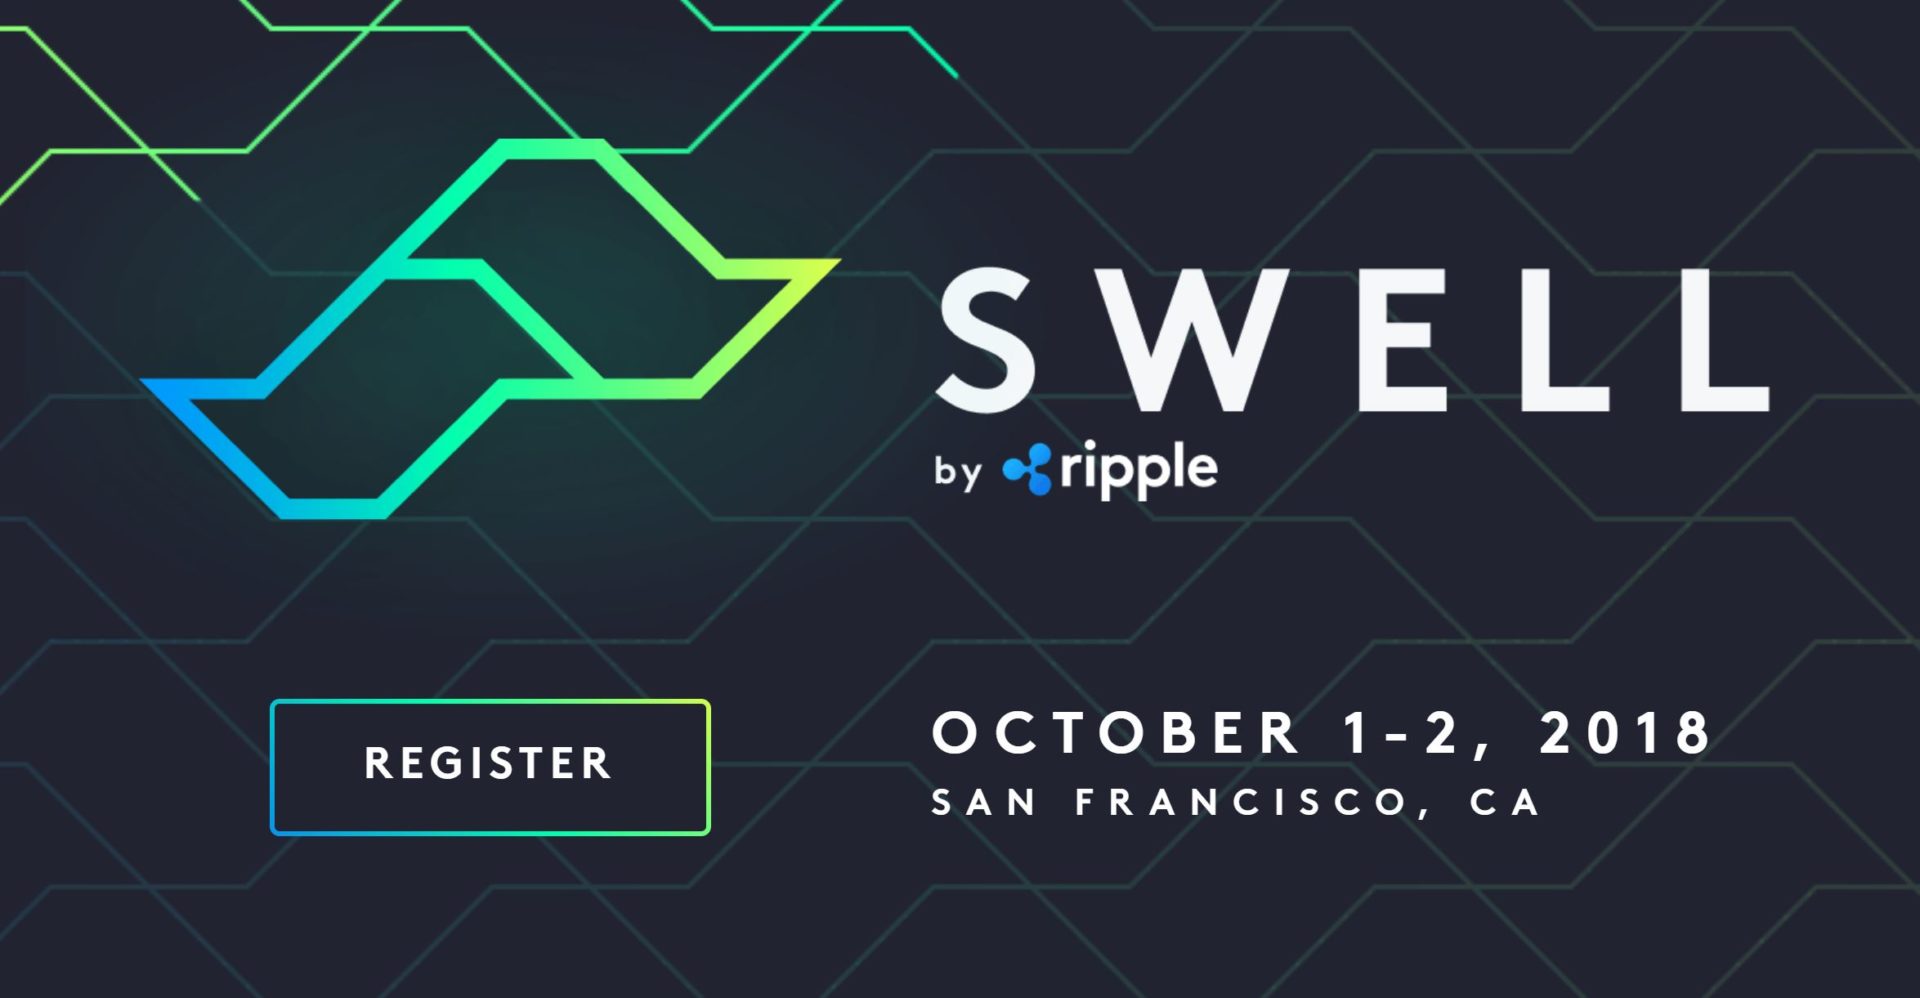 All Eyes Are on Next Weeks Swell Event by Ripple